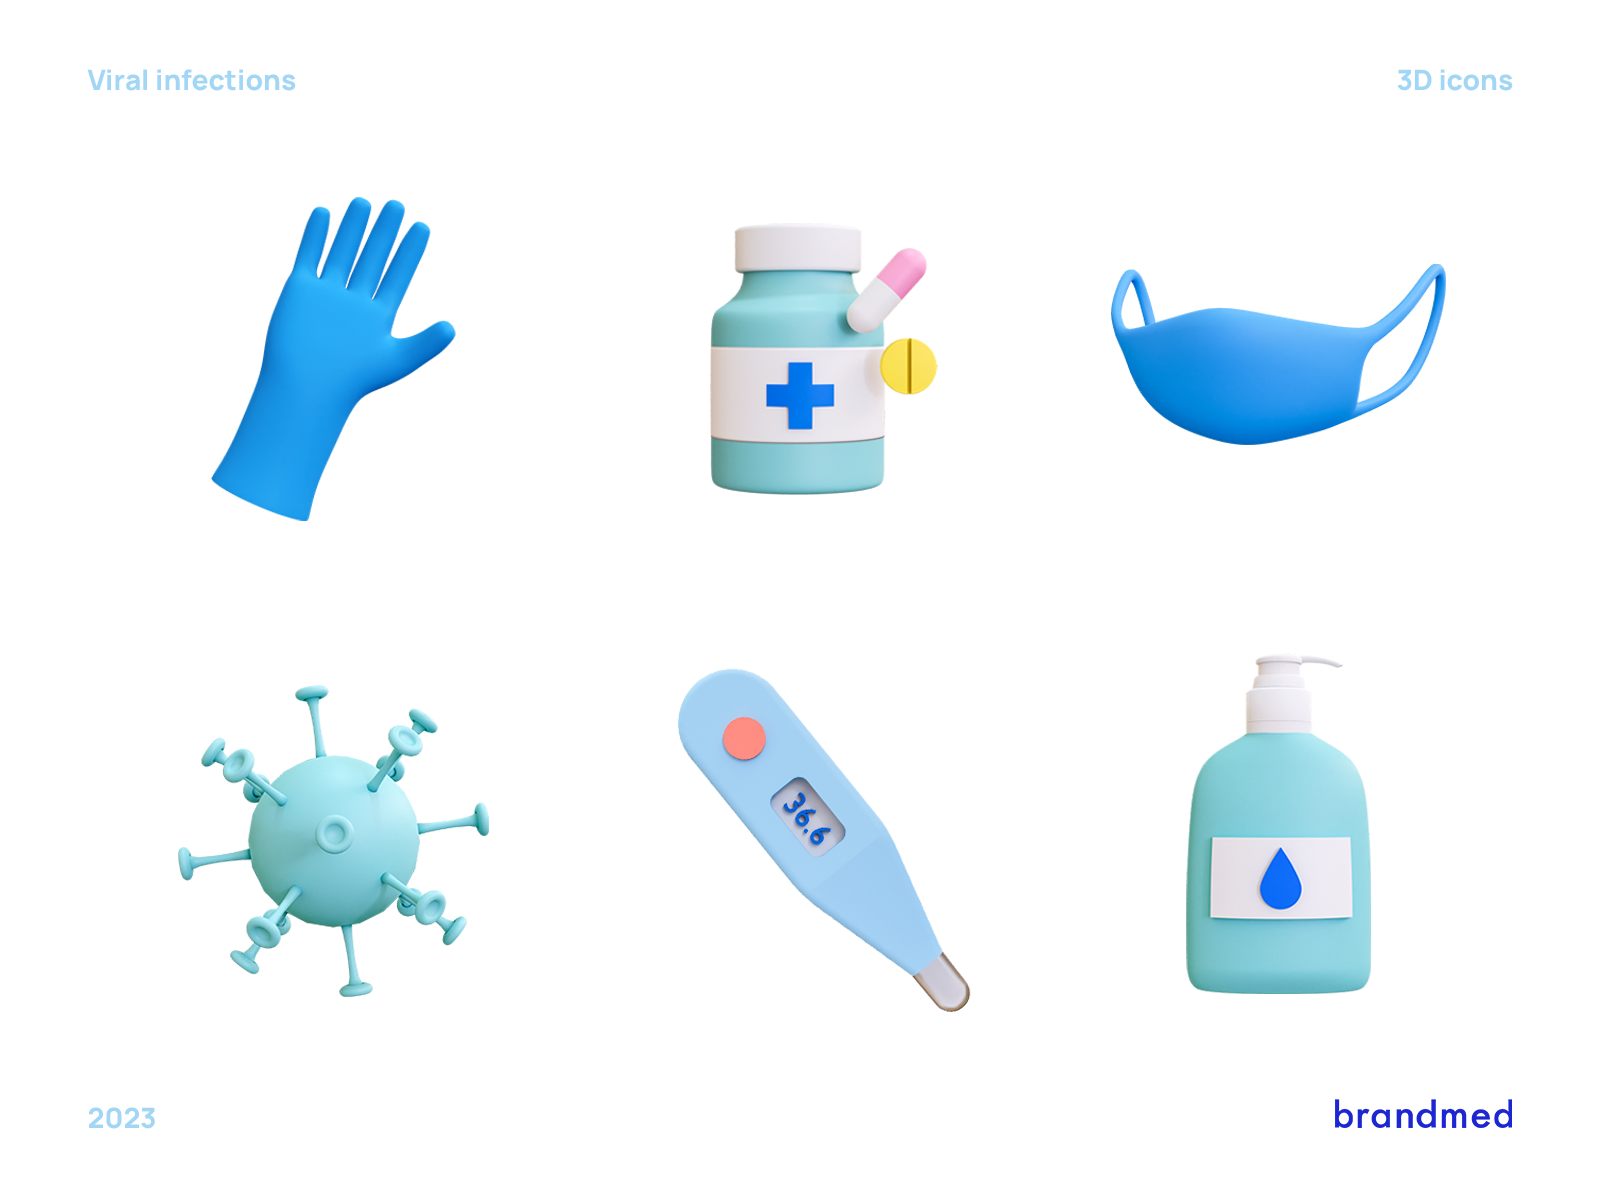 3D viral infection icons